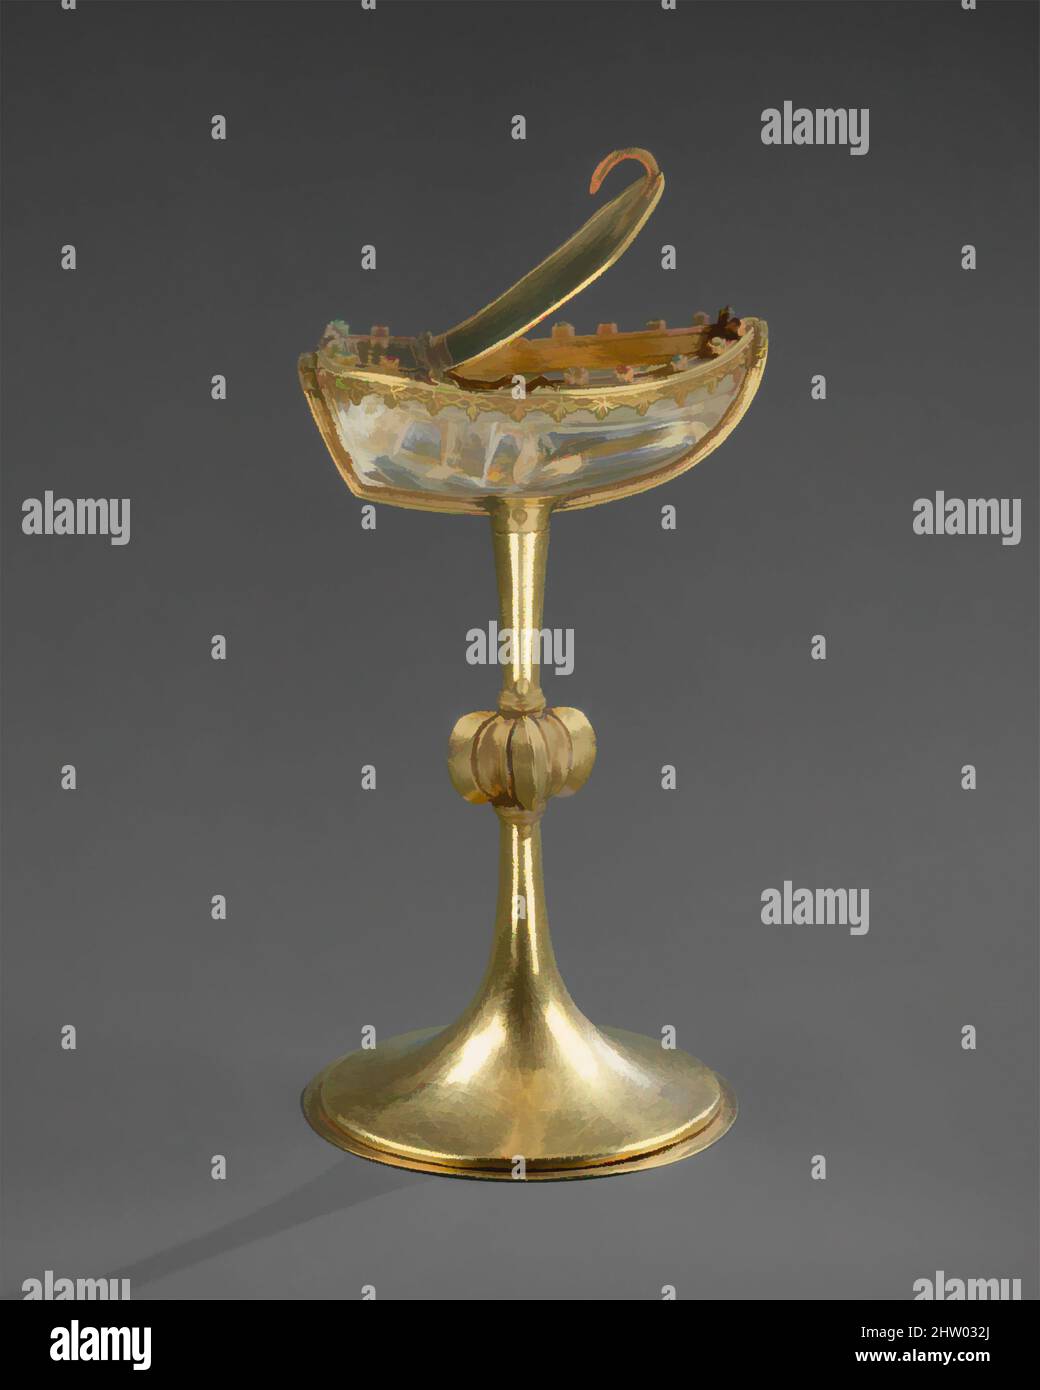 Art inspired by Saltcellar, mid-13th century, Made in Paris, France, French, Gold, rock crystal, emeralds, pearls, spinel or balas rubies, H. 5 1/2 in. (14 cm); Diam. of foot: 3 1/8 in. (7.9 cm), Metalwork-Gold, Refined design, exquisite craftsmanship, and costly materials make this a, Classic works modernized by Artotop with a splash of modernity. Shapes, color and value, eye-catching visual impact on art. Emotions through freedom of artworks in a contemporary way. A timeless message pursuing a wildly creative new direction. Artists turning to the digital medium and creating the Artotop NFT Stock Photo